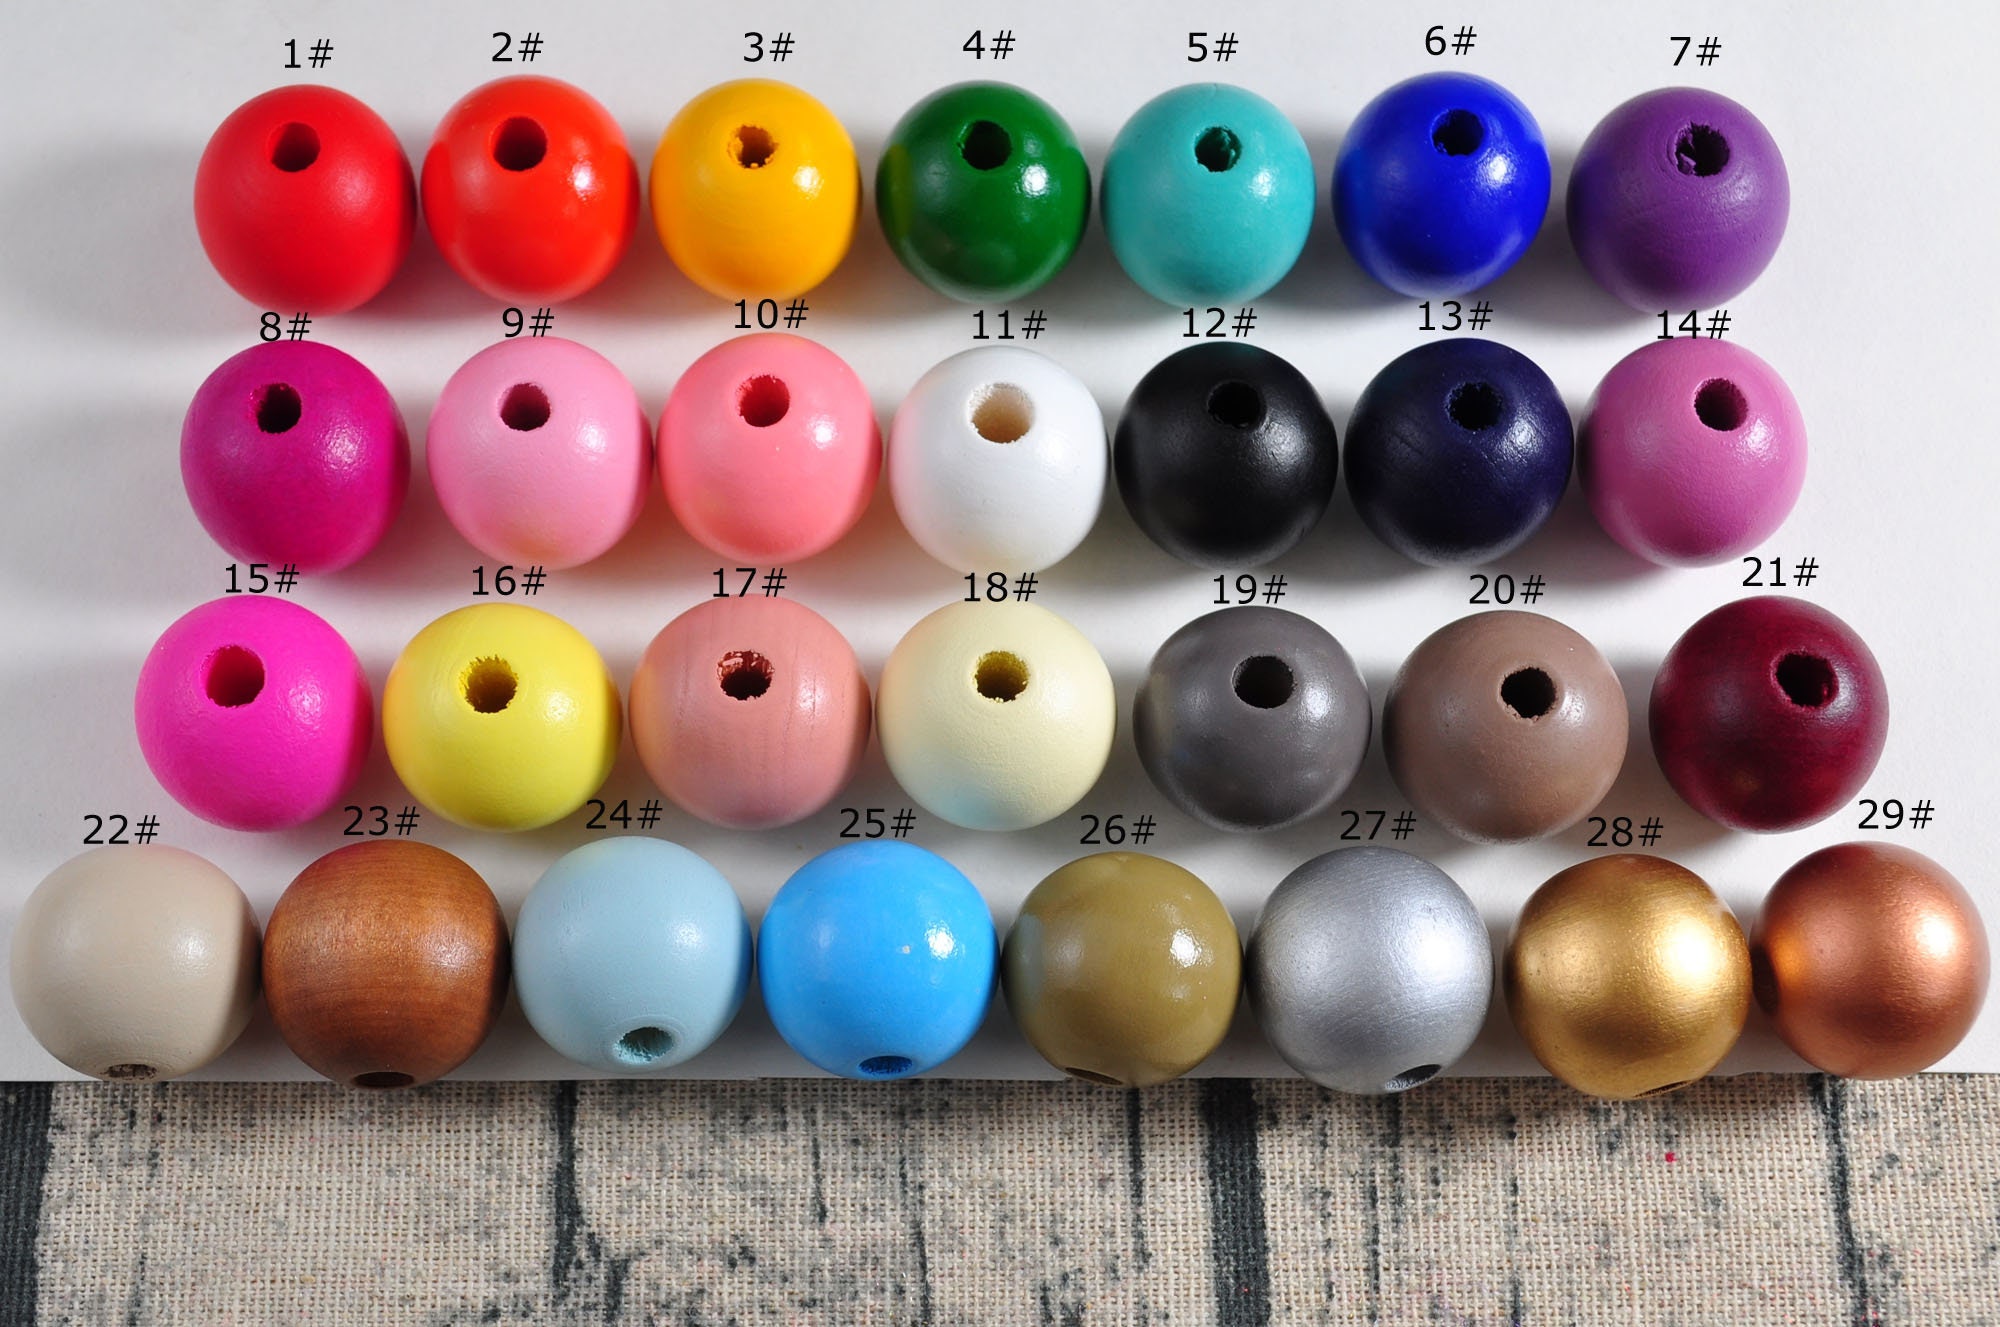 50 Pcs Smiling Face Wooden Beads Schima Wood Beads Round Spacer Painted Wooden Beads with Hole Doll Head Beads DIY Jewelry Finding Macrame Pendant